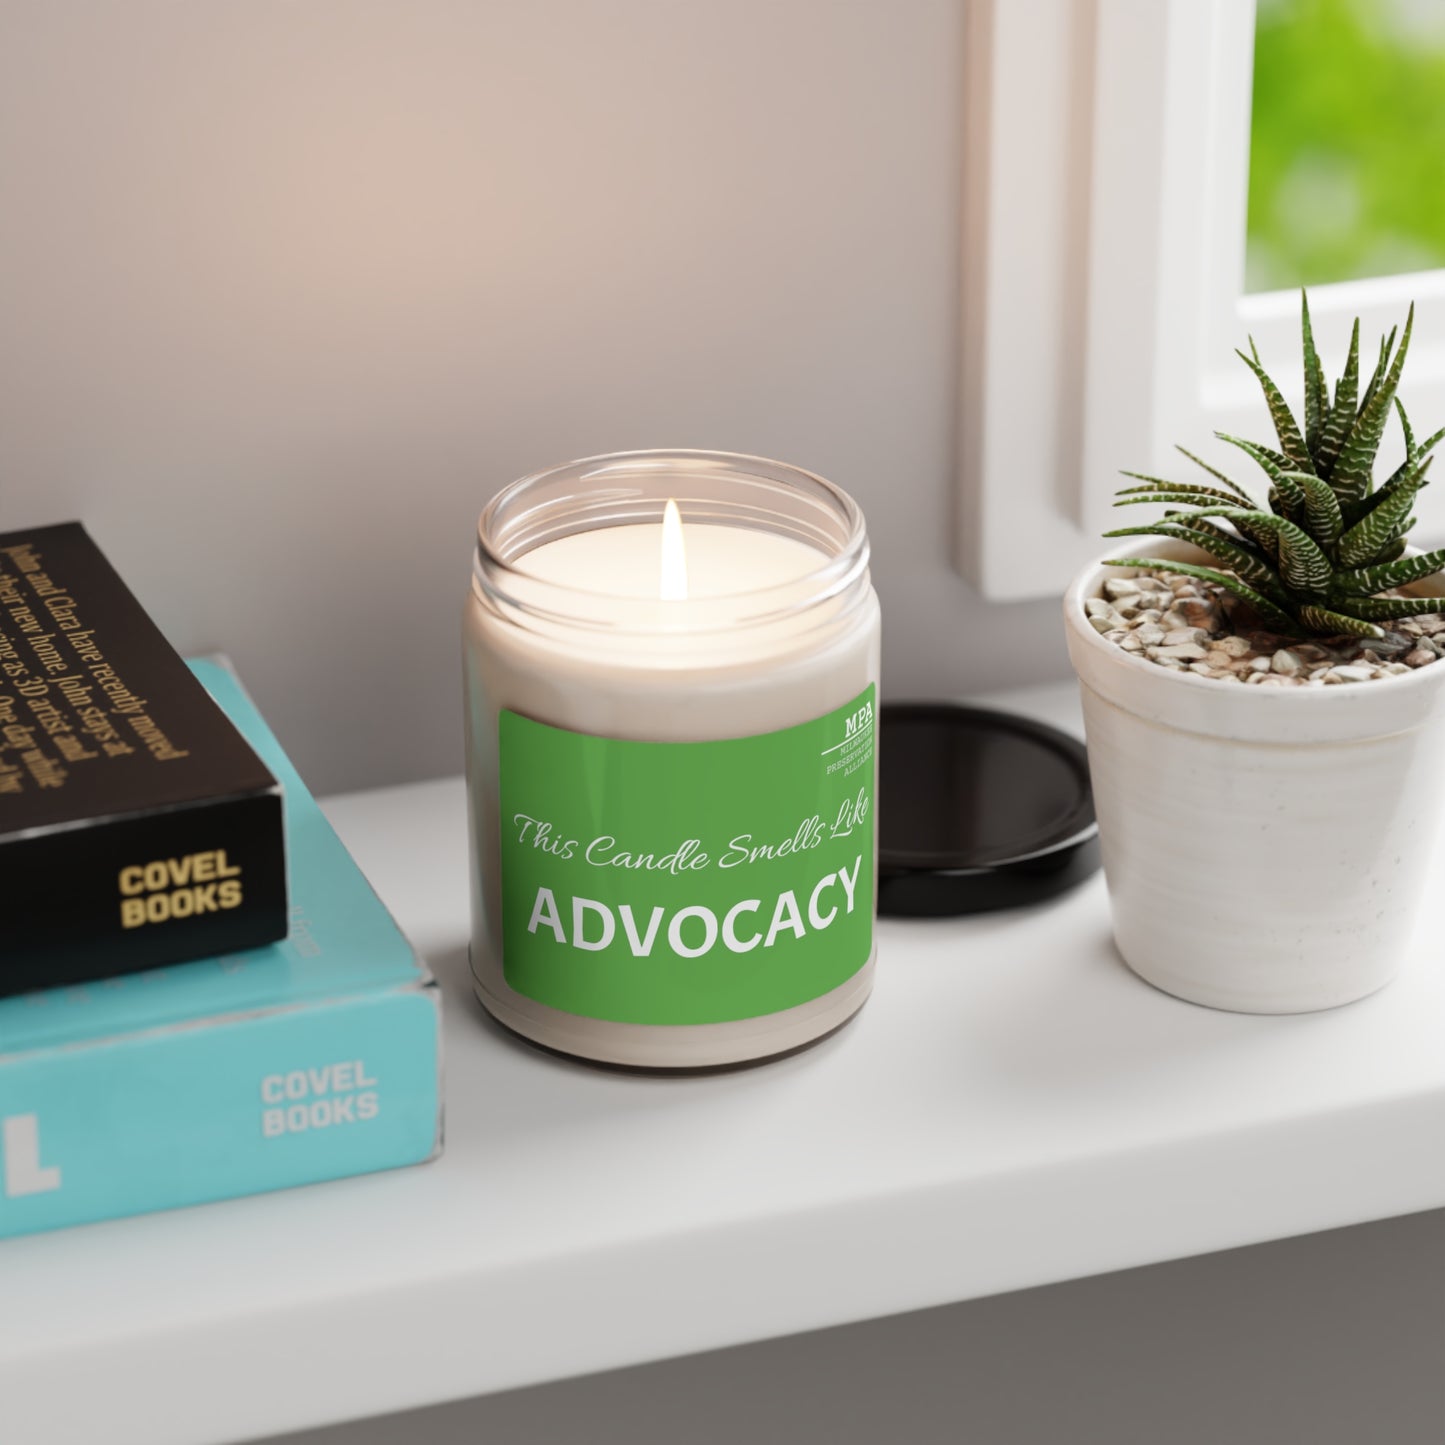 Advocacy Scented Soy Candle, 9oz